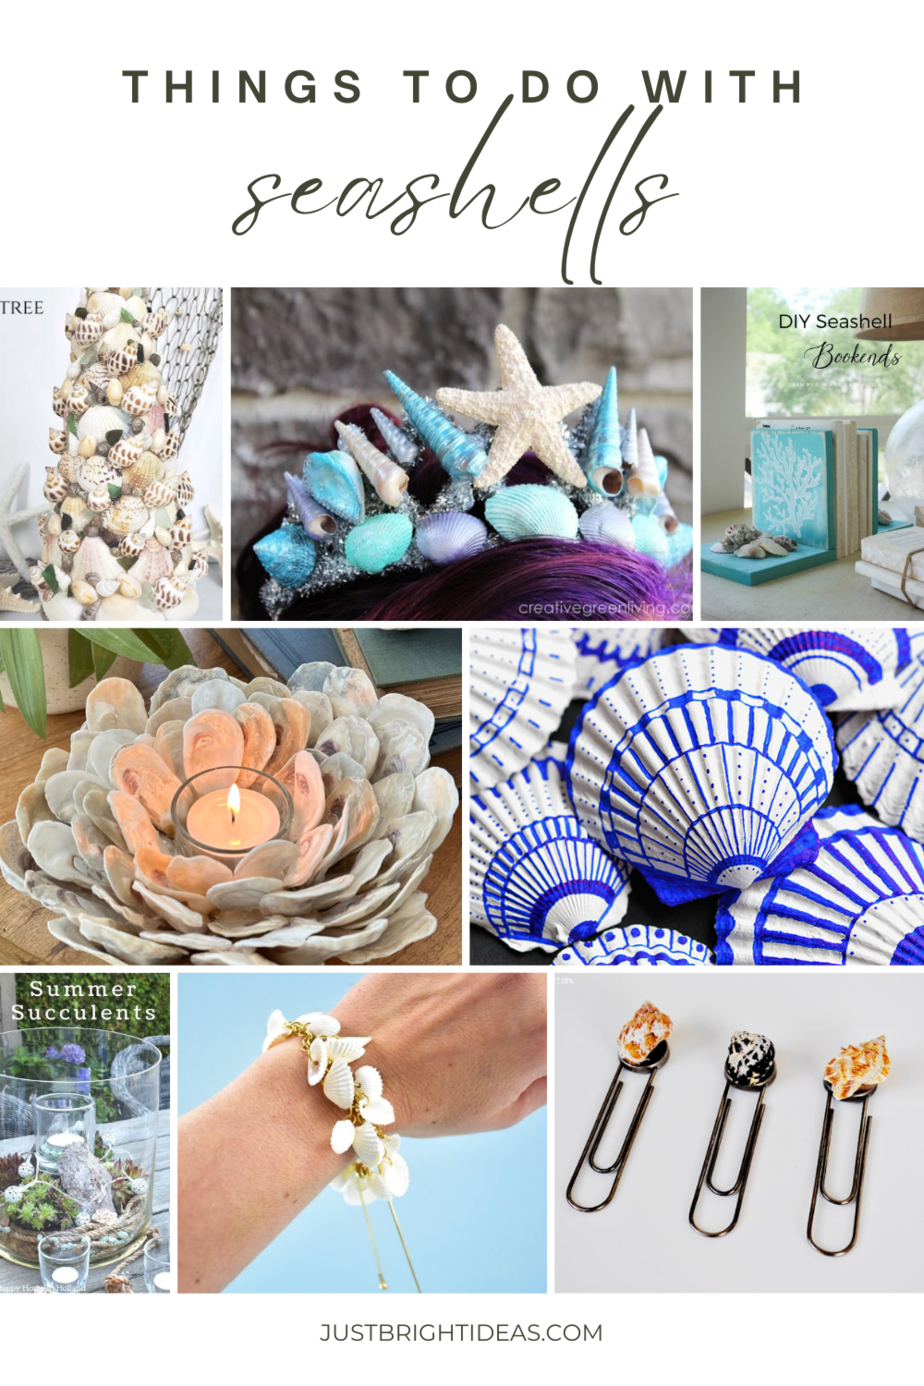 Creative things to do with seashells! From stunning home decor to exquisite jewelry, dive into the endless world of crafts! Let your imagination run wild and bring the beach vibes to your creations. Get inspired today! 🐚✨ #SeashellCrafts #CraftersParadise